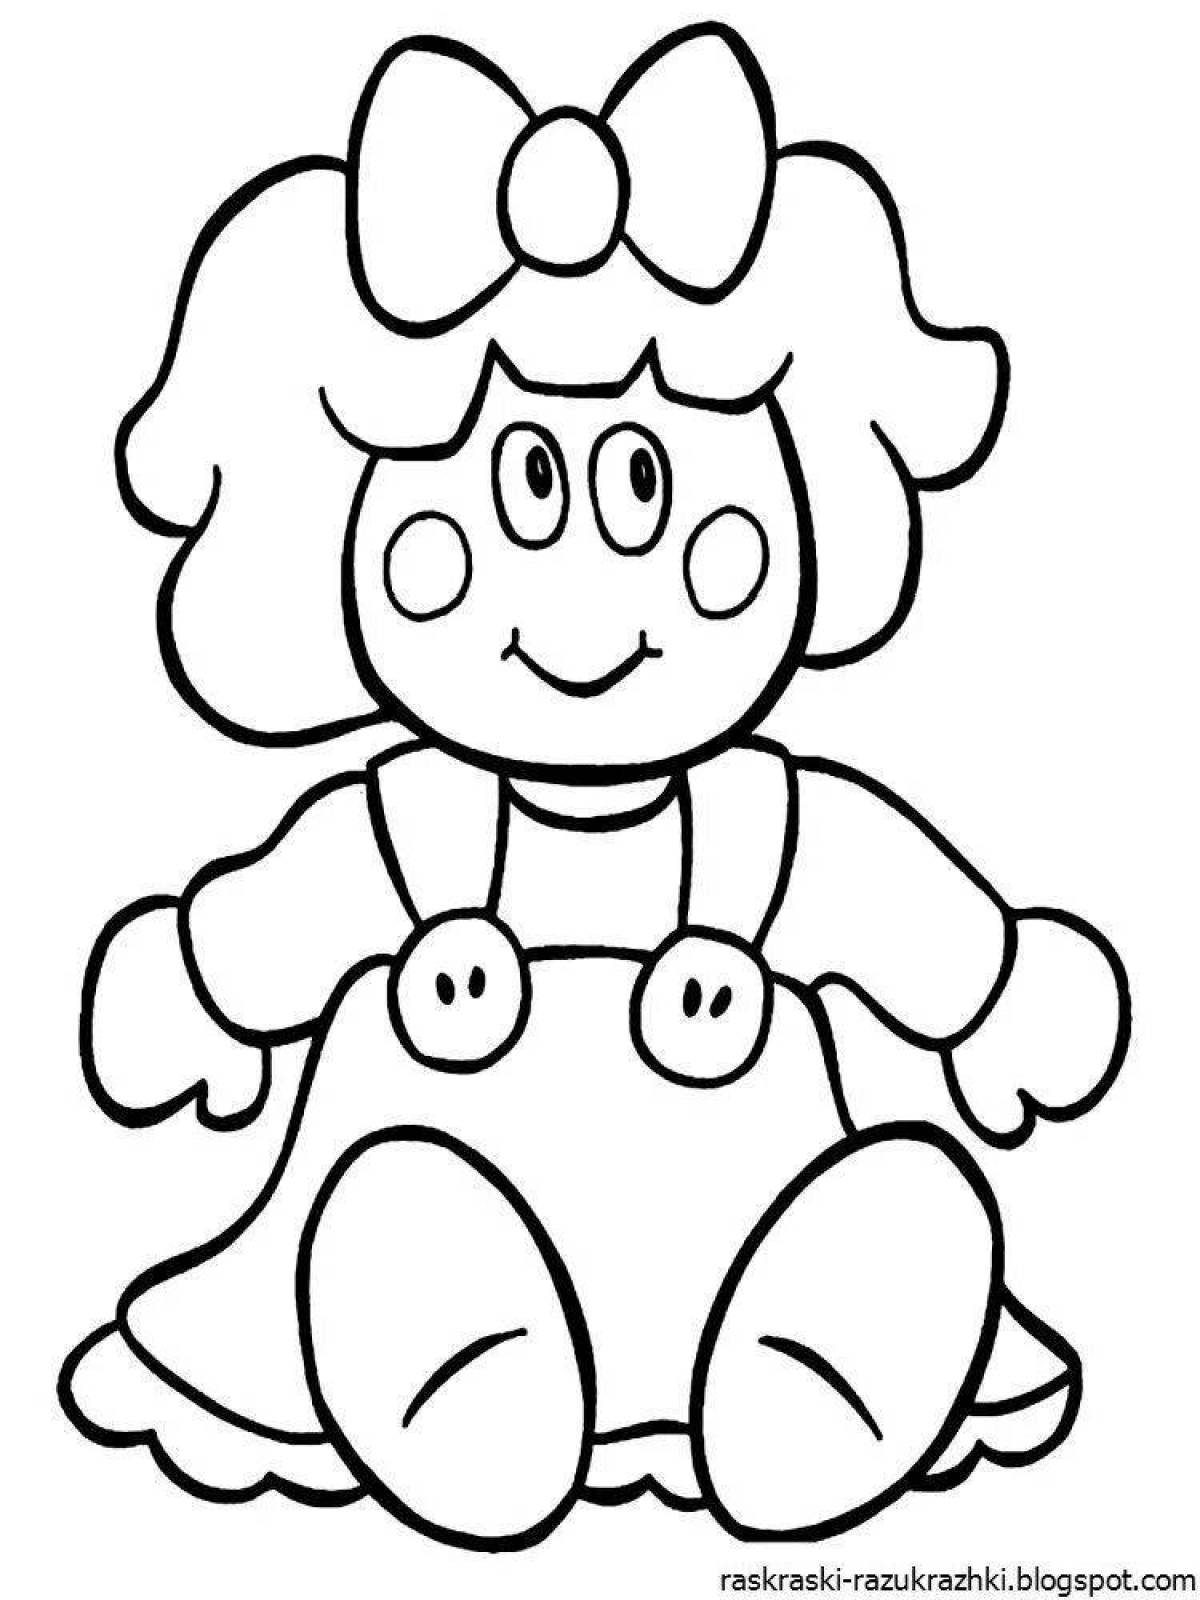 Fun coloring doll for 3-4 year olds